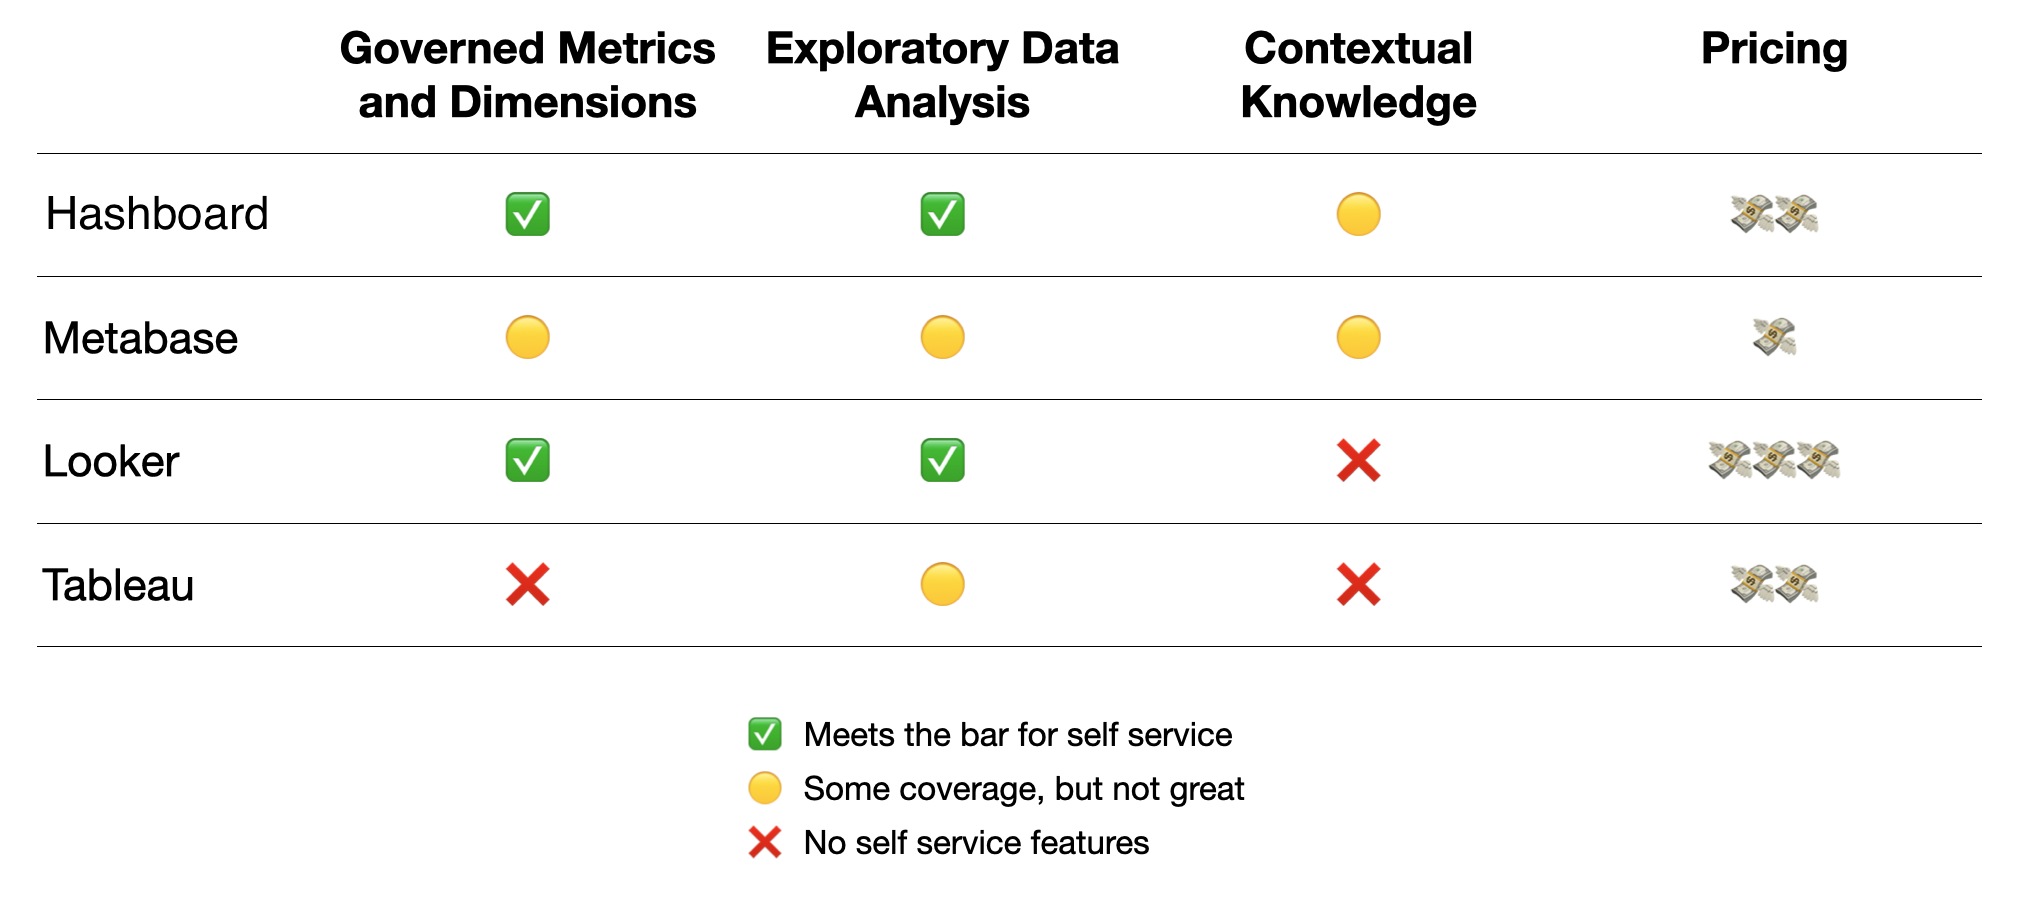 a comparison table of self service features (governed metrics, exploratory data analysis, context, and pricing)) for hashboard, metabase, looker, and tableau